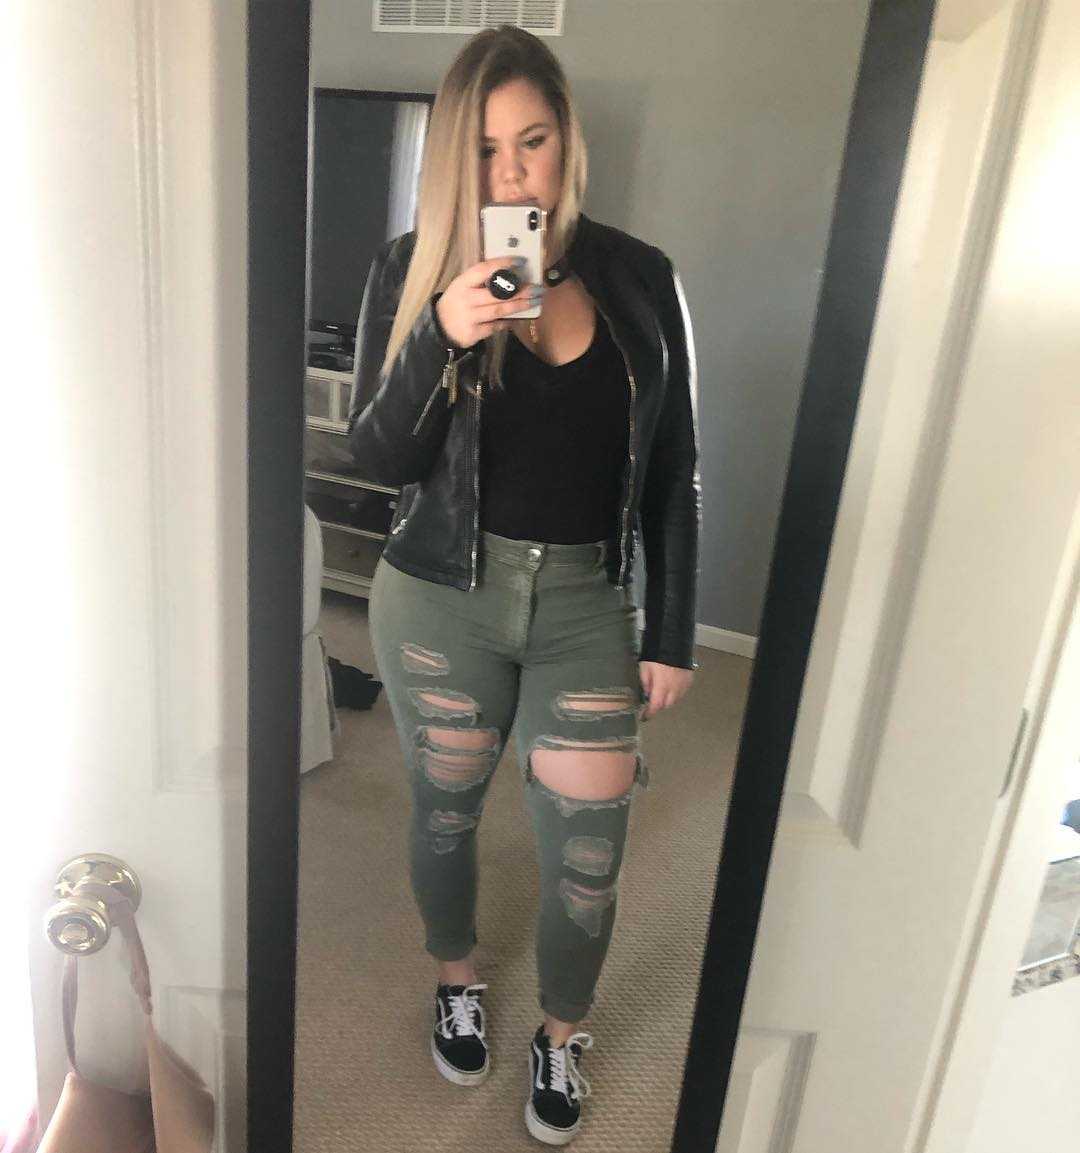 49 Hot Pictures Of Kailyn Lowry Are Simply Excessively Damn Delectable | Best Of Comic Books